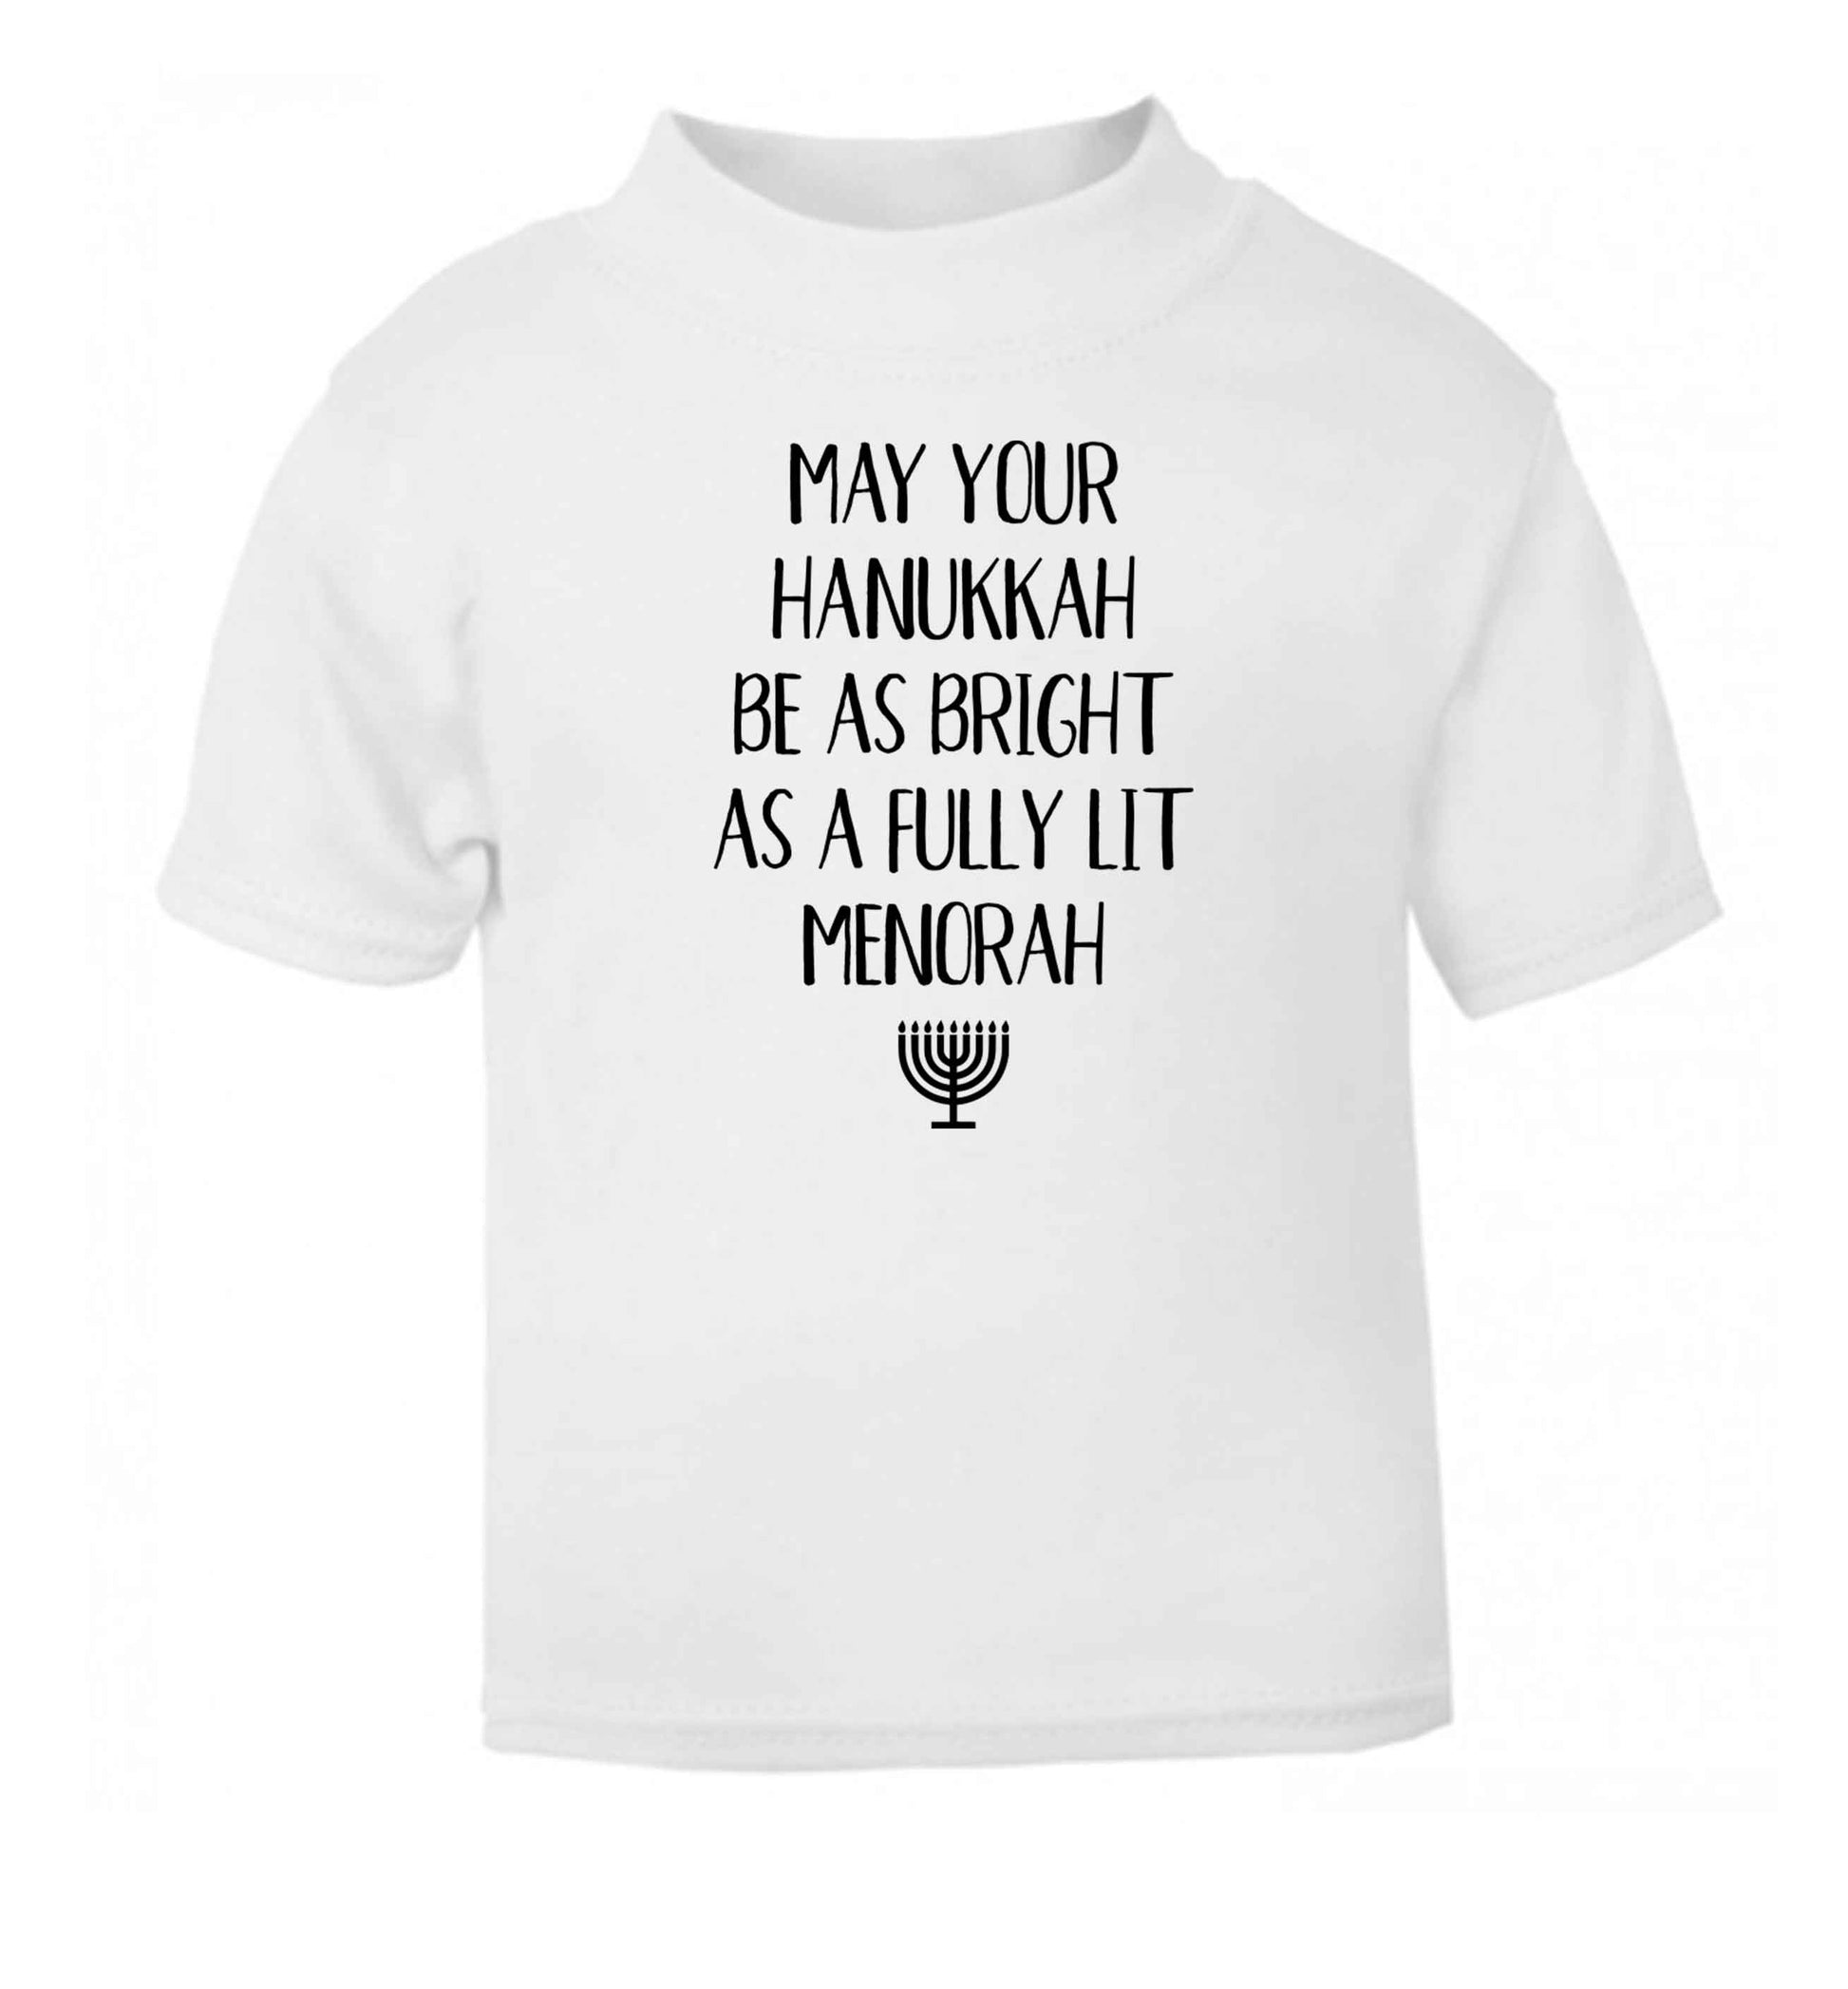 May your hanukkah be as bright as a fully lit menorah white Baby Toddler Tshirt 2 Years